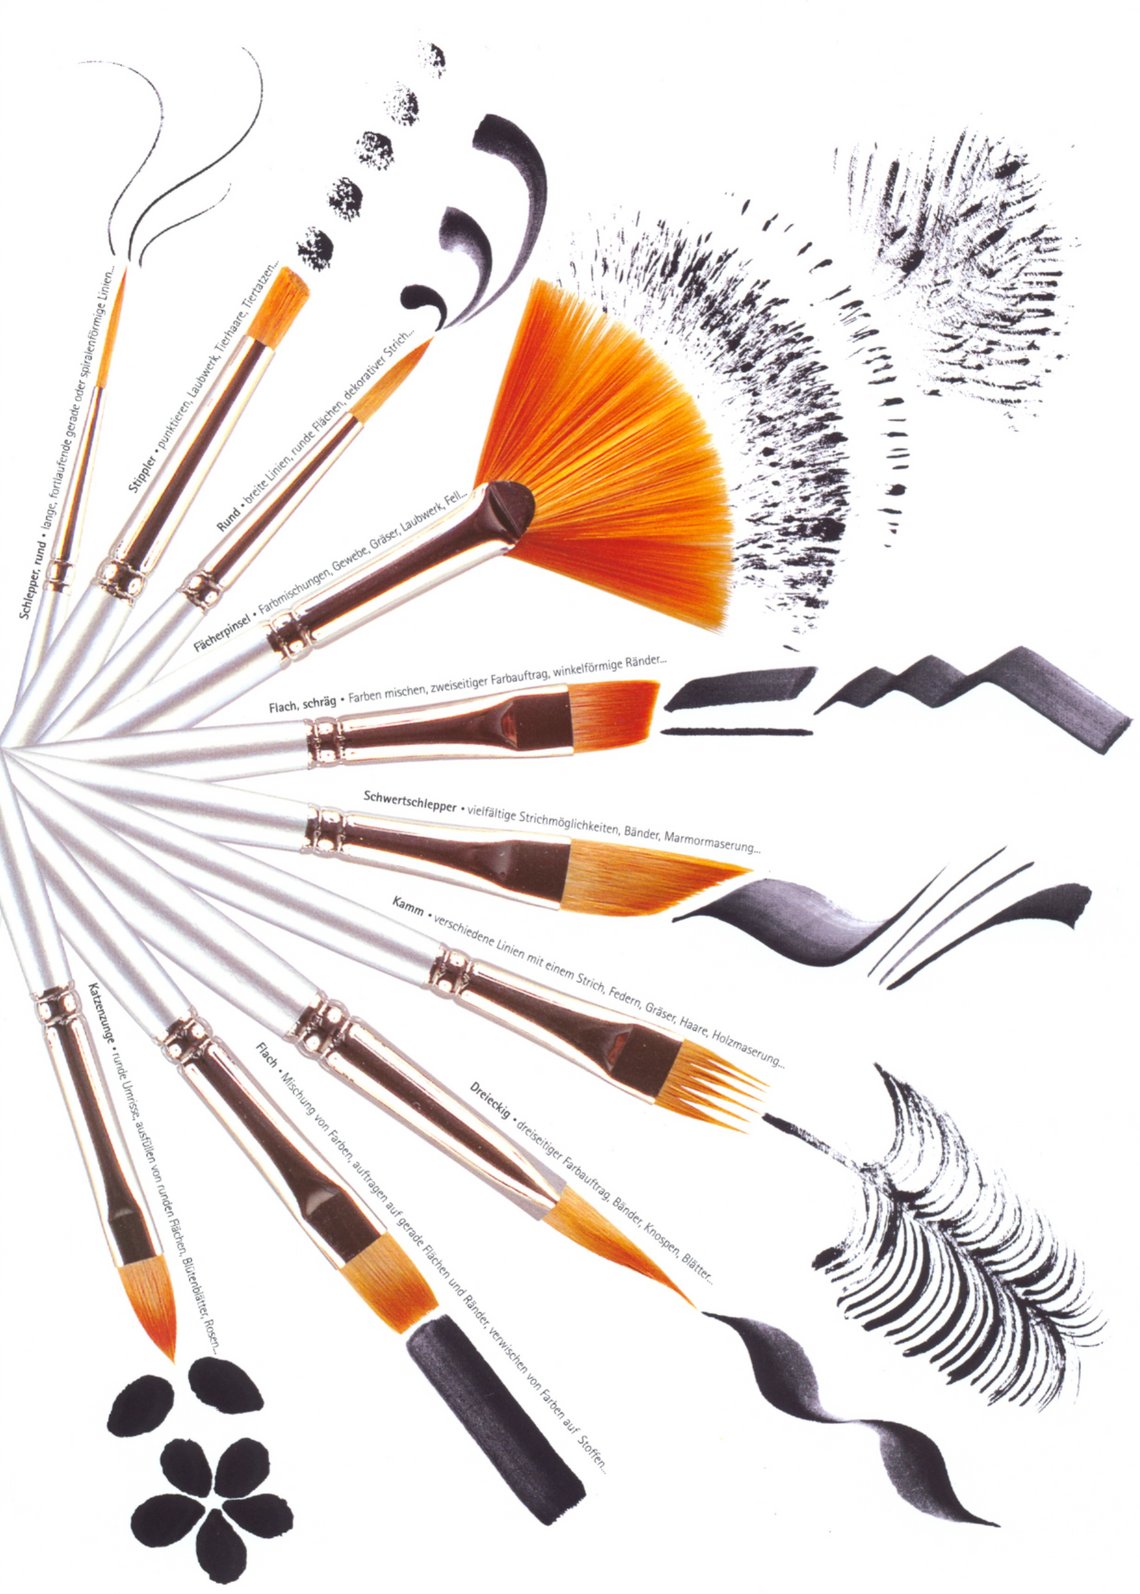 Silverline Acry brushes by ZAHN